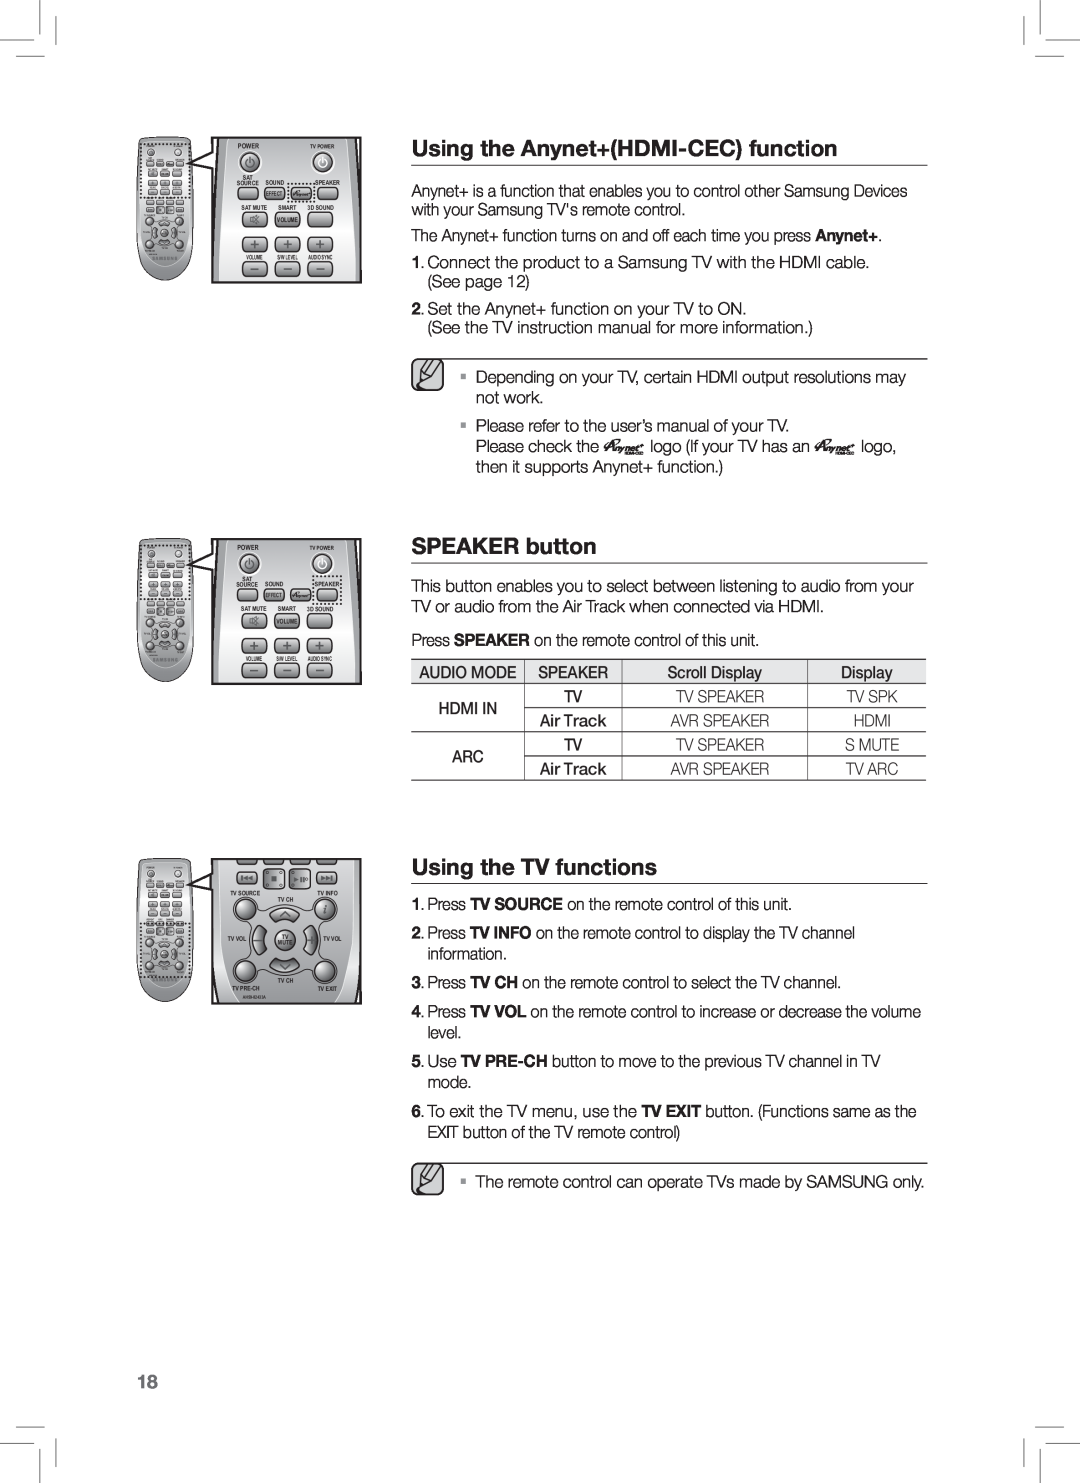 Samsung HW-E350 user manual Using the Anynet+HDMI-CECfunction, SPEAKER button, Using the TV functions 